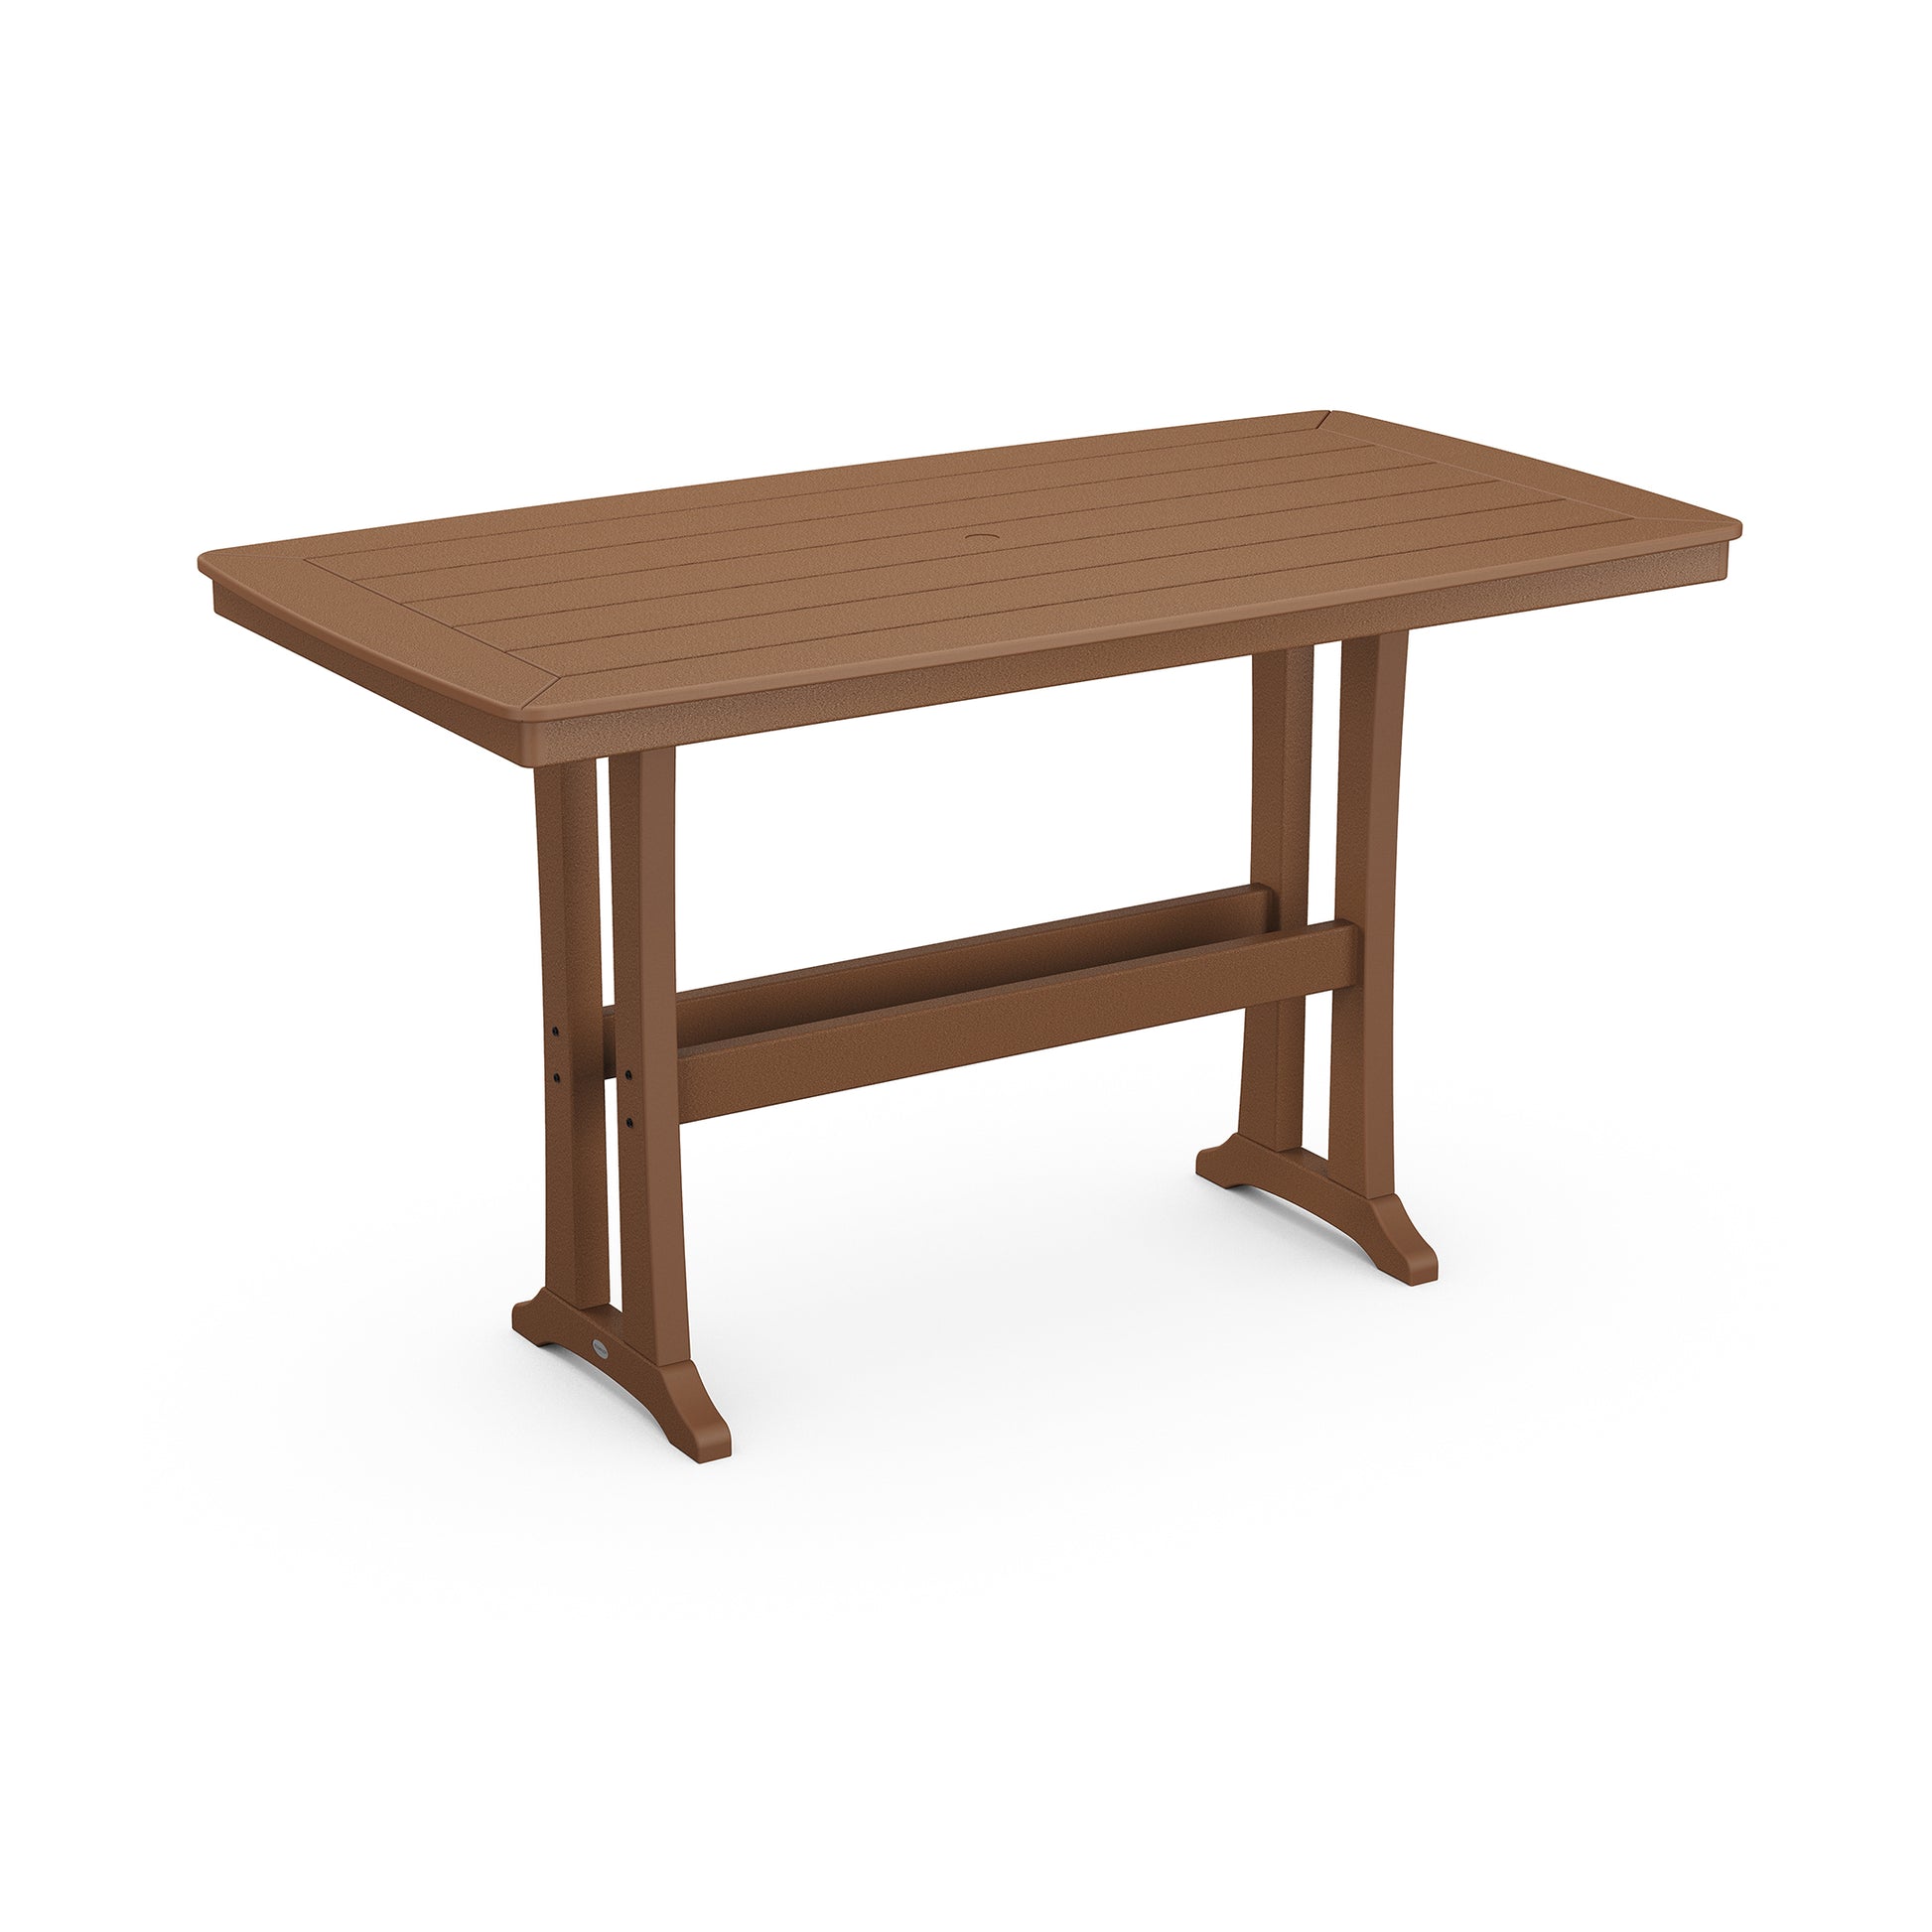 A rectangular, brown POLYWOOD Nautical Trestle 38" x 73" Bar Table with a slatted top and metal legs on a white background.